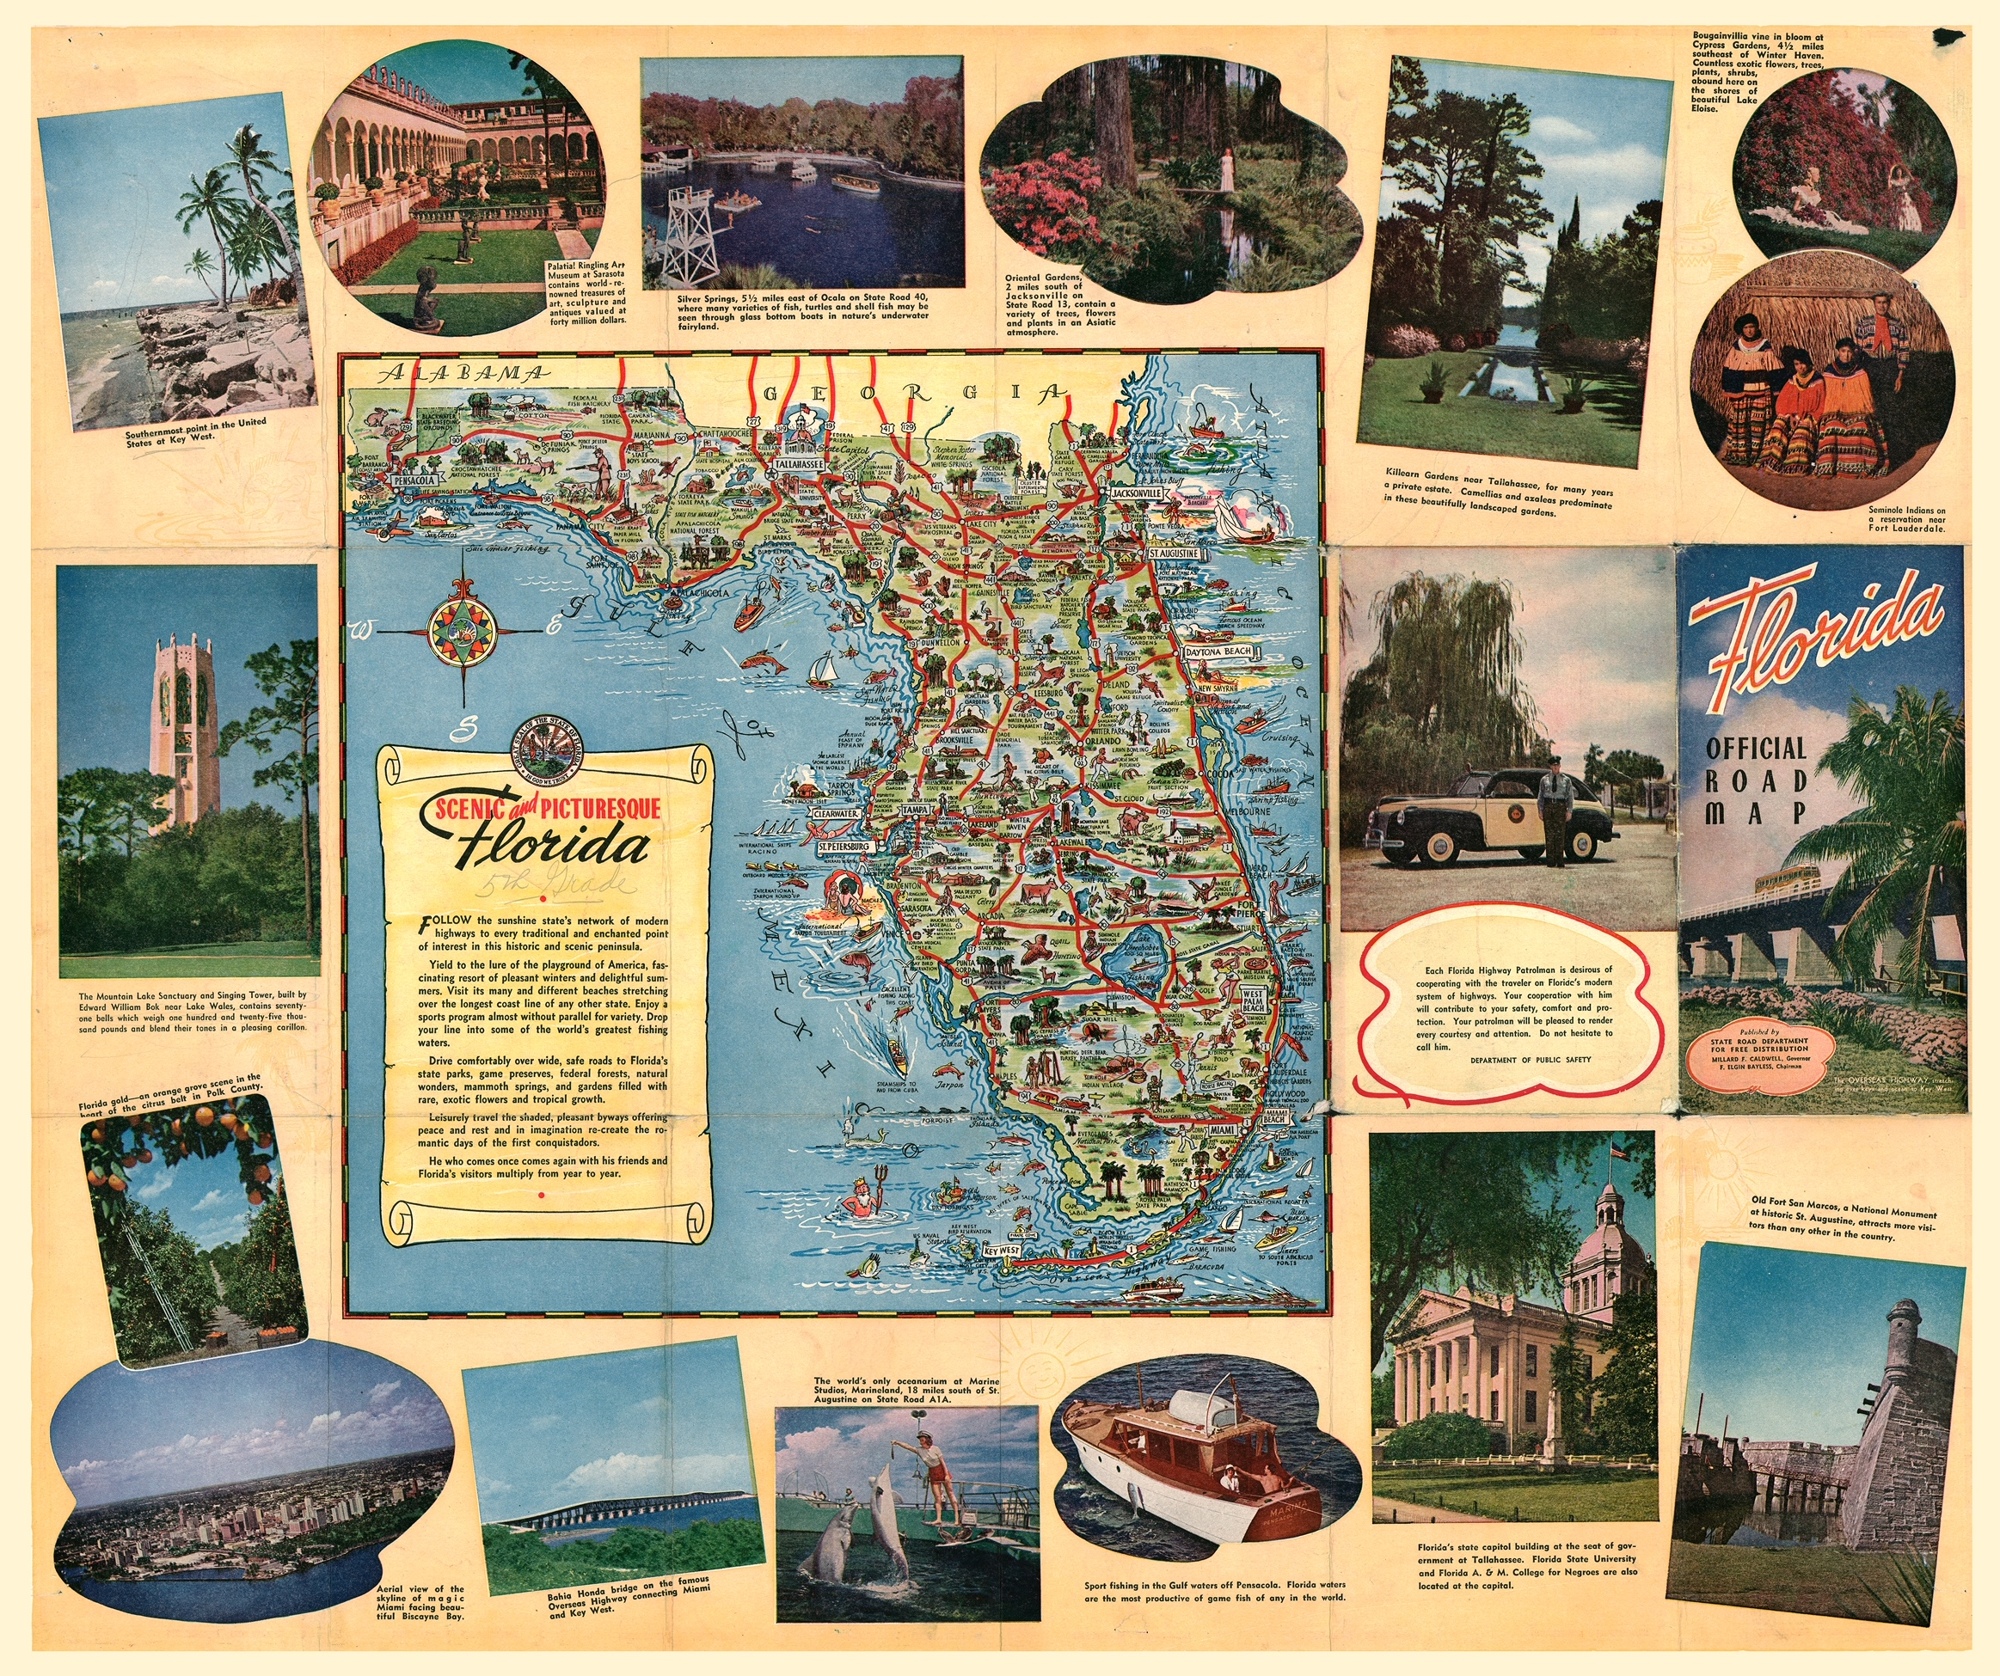 The state travel agency handed out official Florida road maps. This side features images from around the state, and the other is a typical road map of Florida.